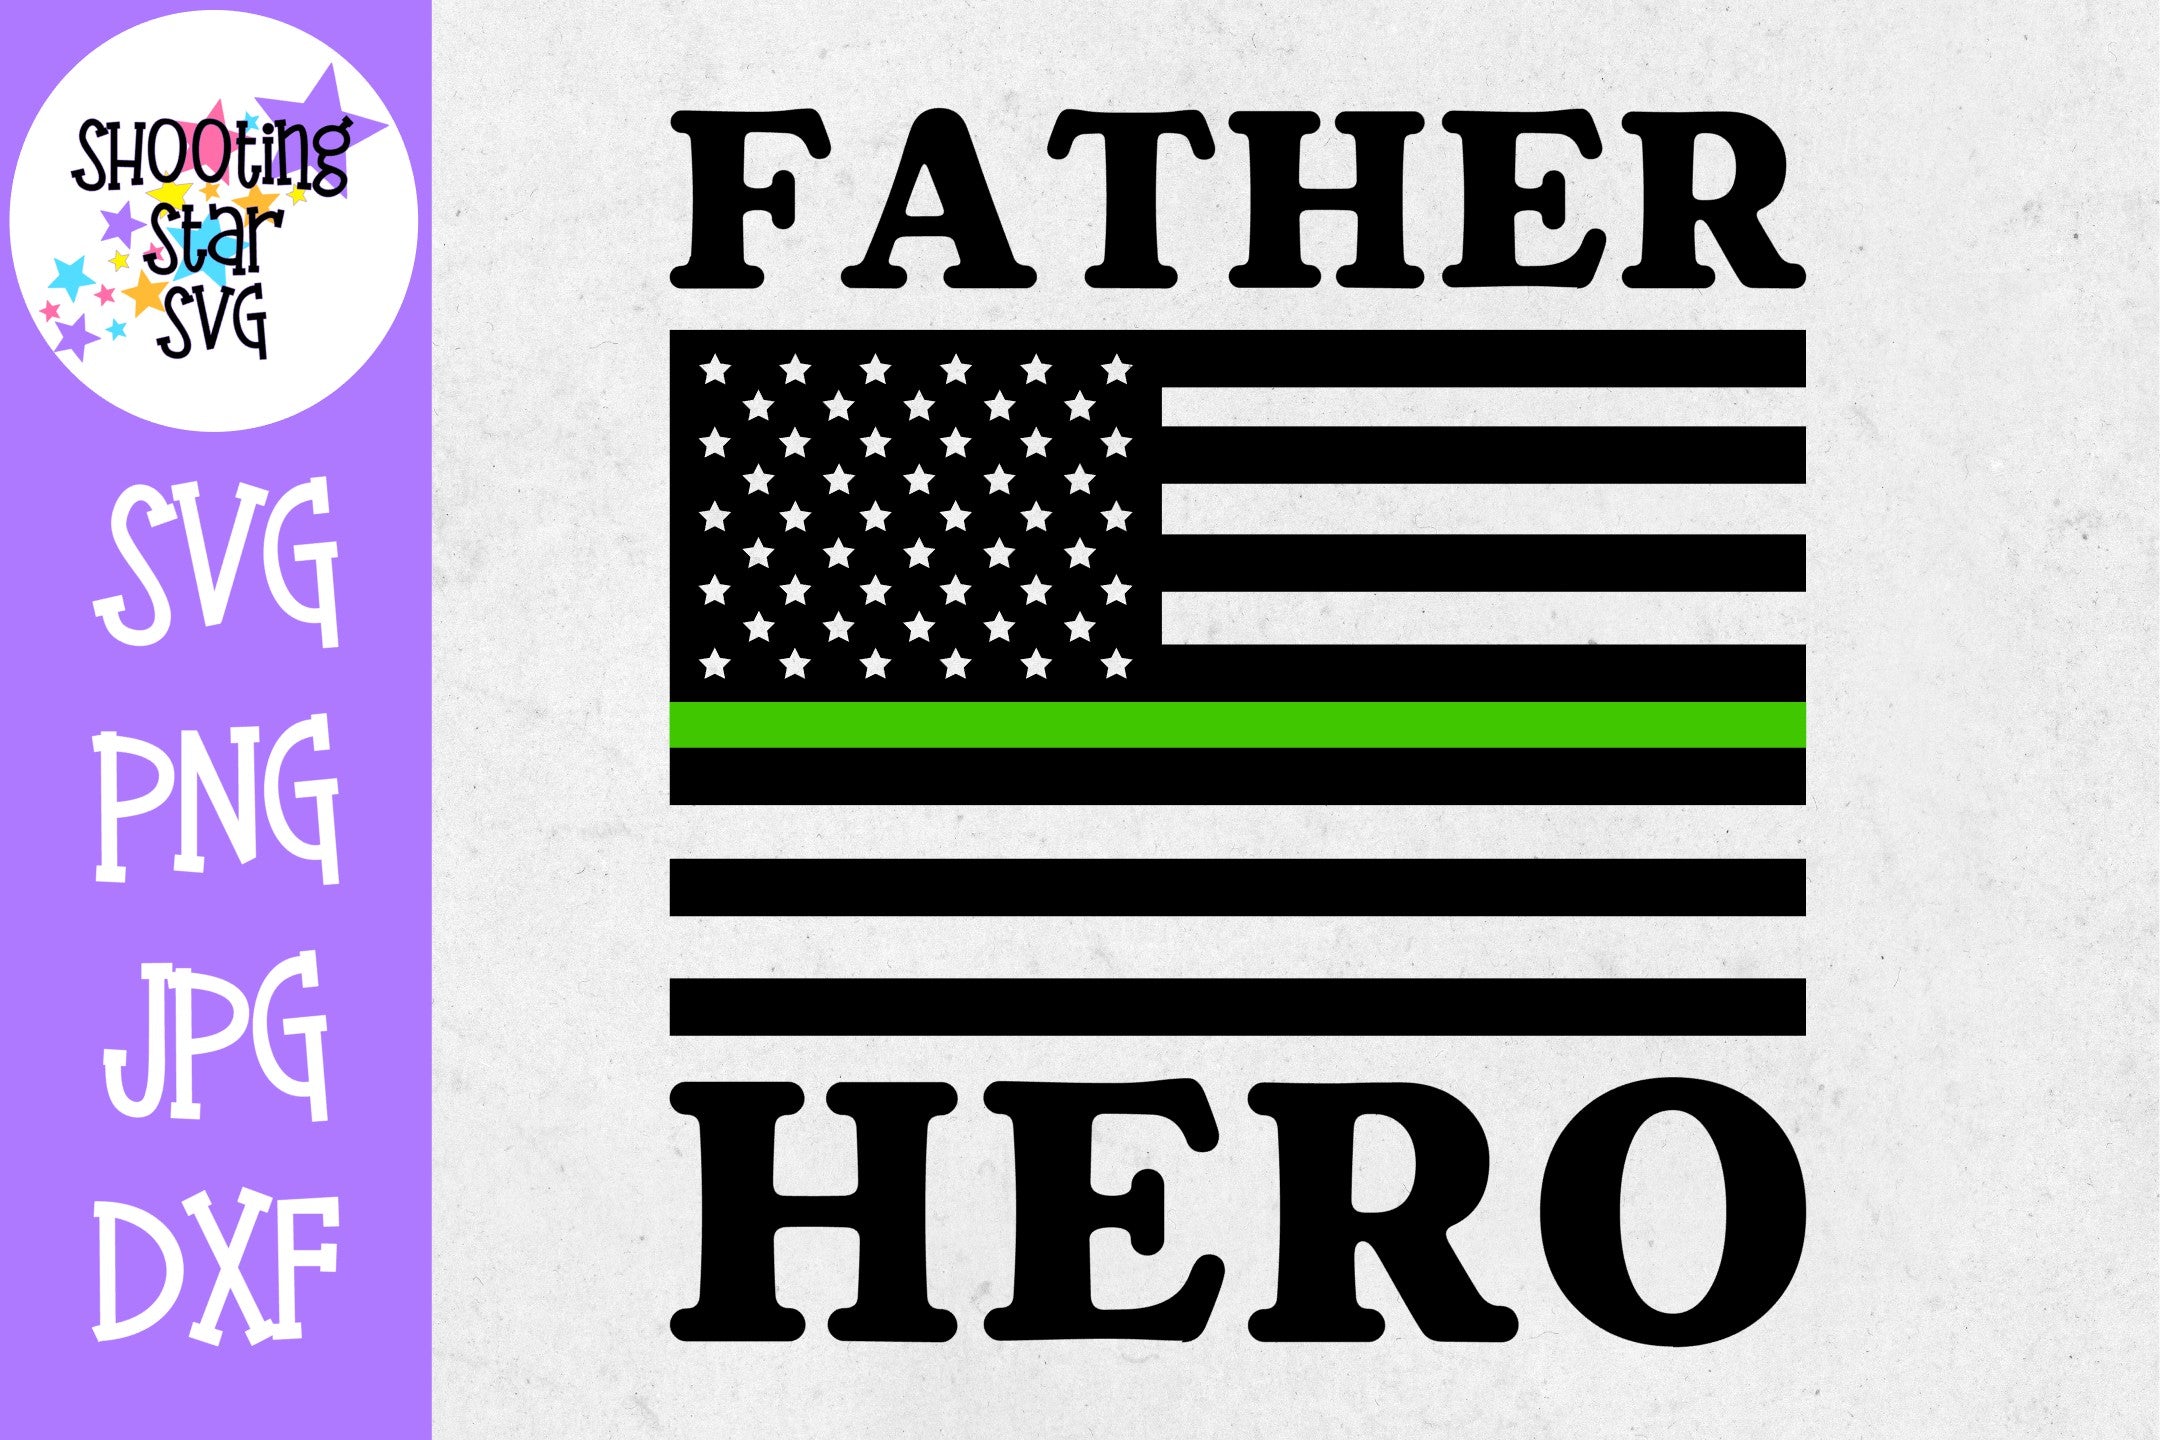 Thin Green Line American Flag SVG - Father Hero